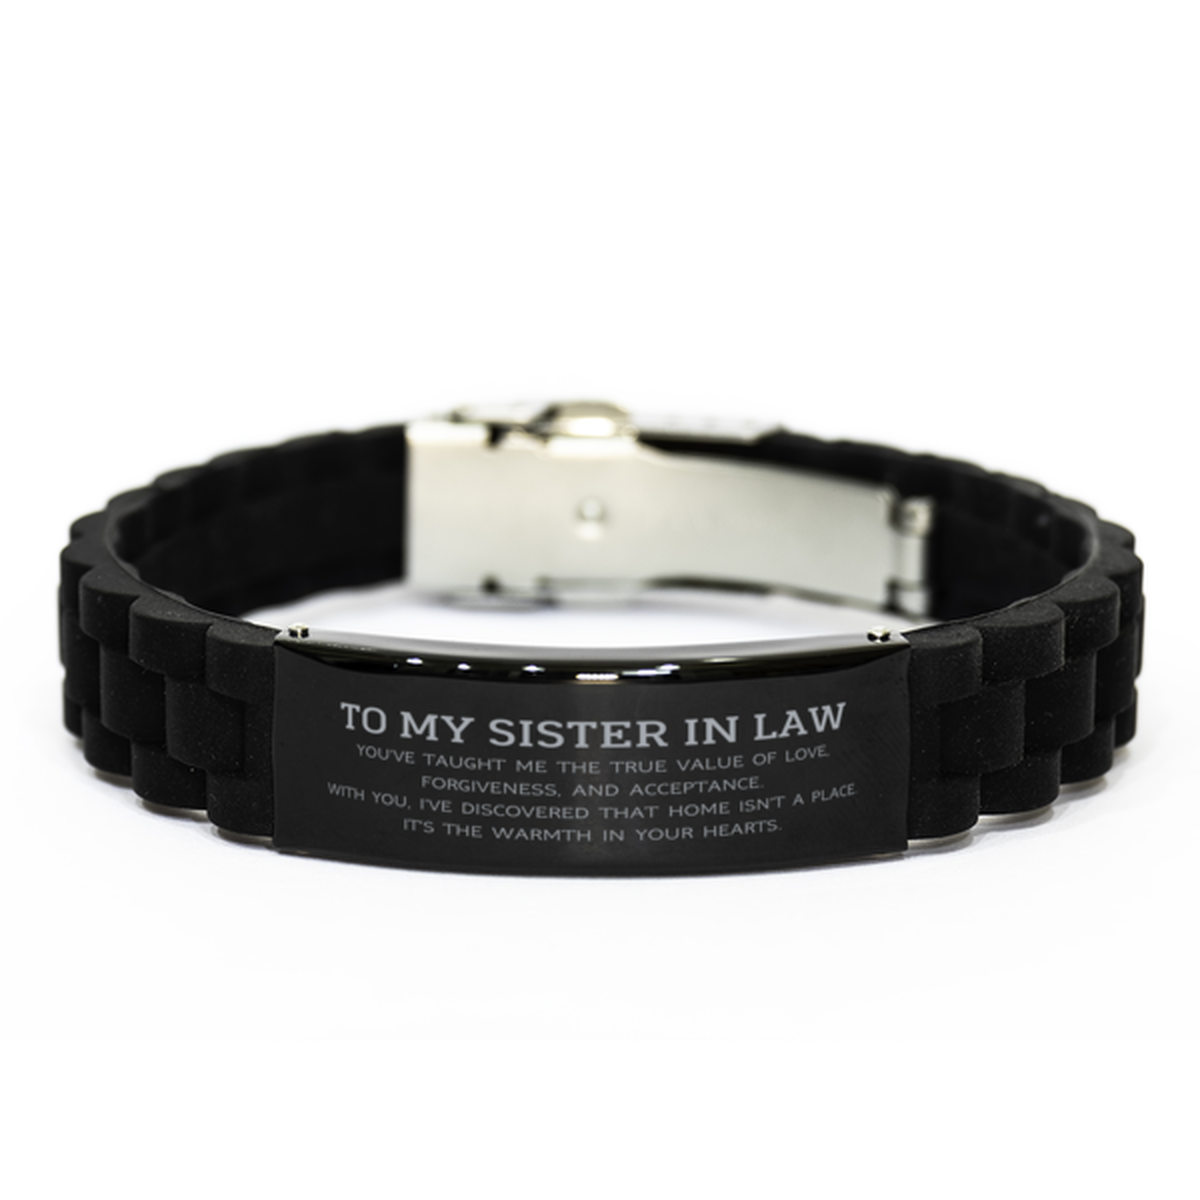 To My Sister In Law Gifts, You've taught me the true value of love, Thank You Gifts For Sister In Law, Birthday Black Glidelock Clasp Bracelet For Sister In Law